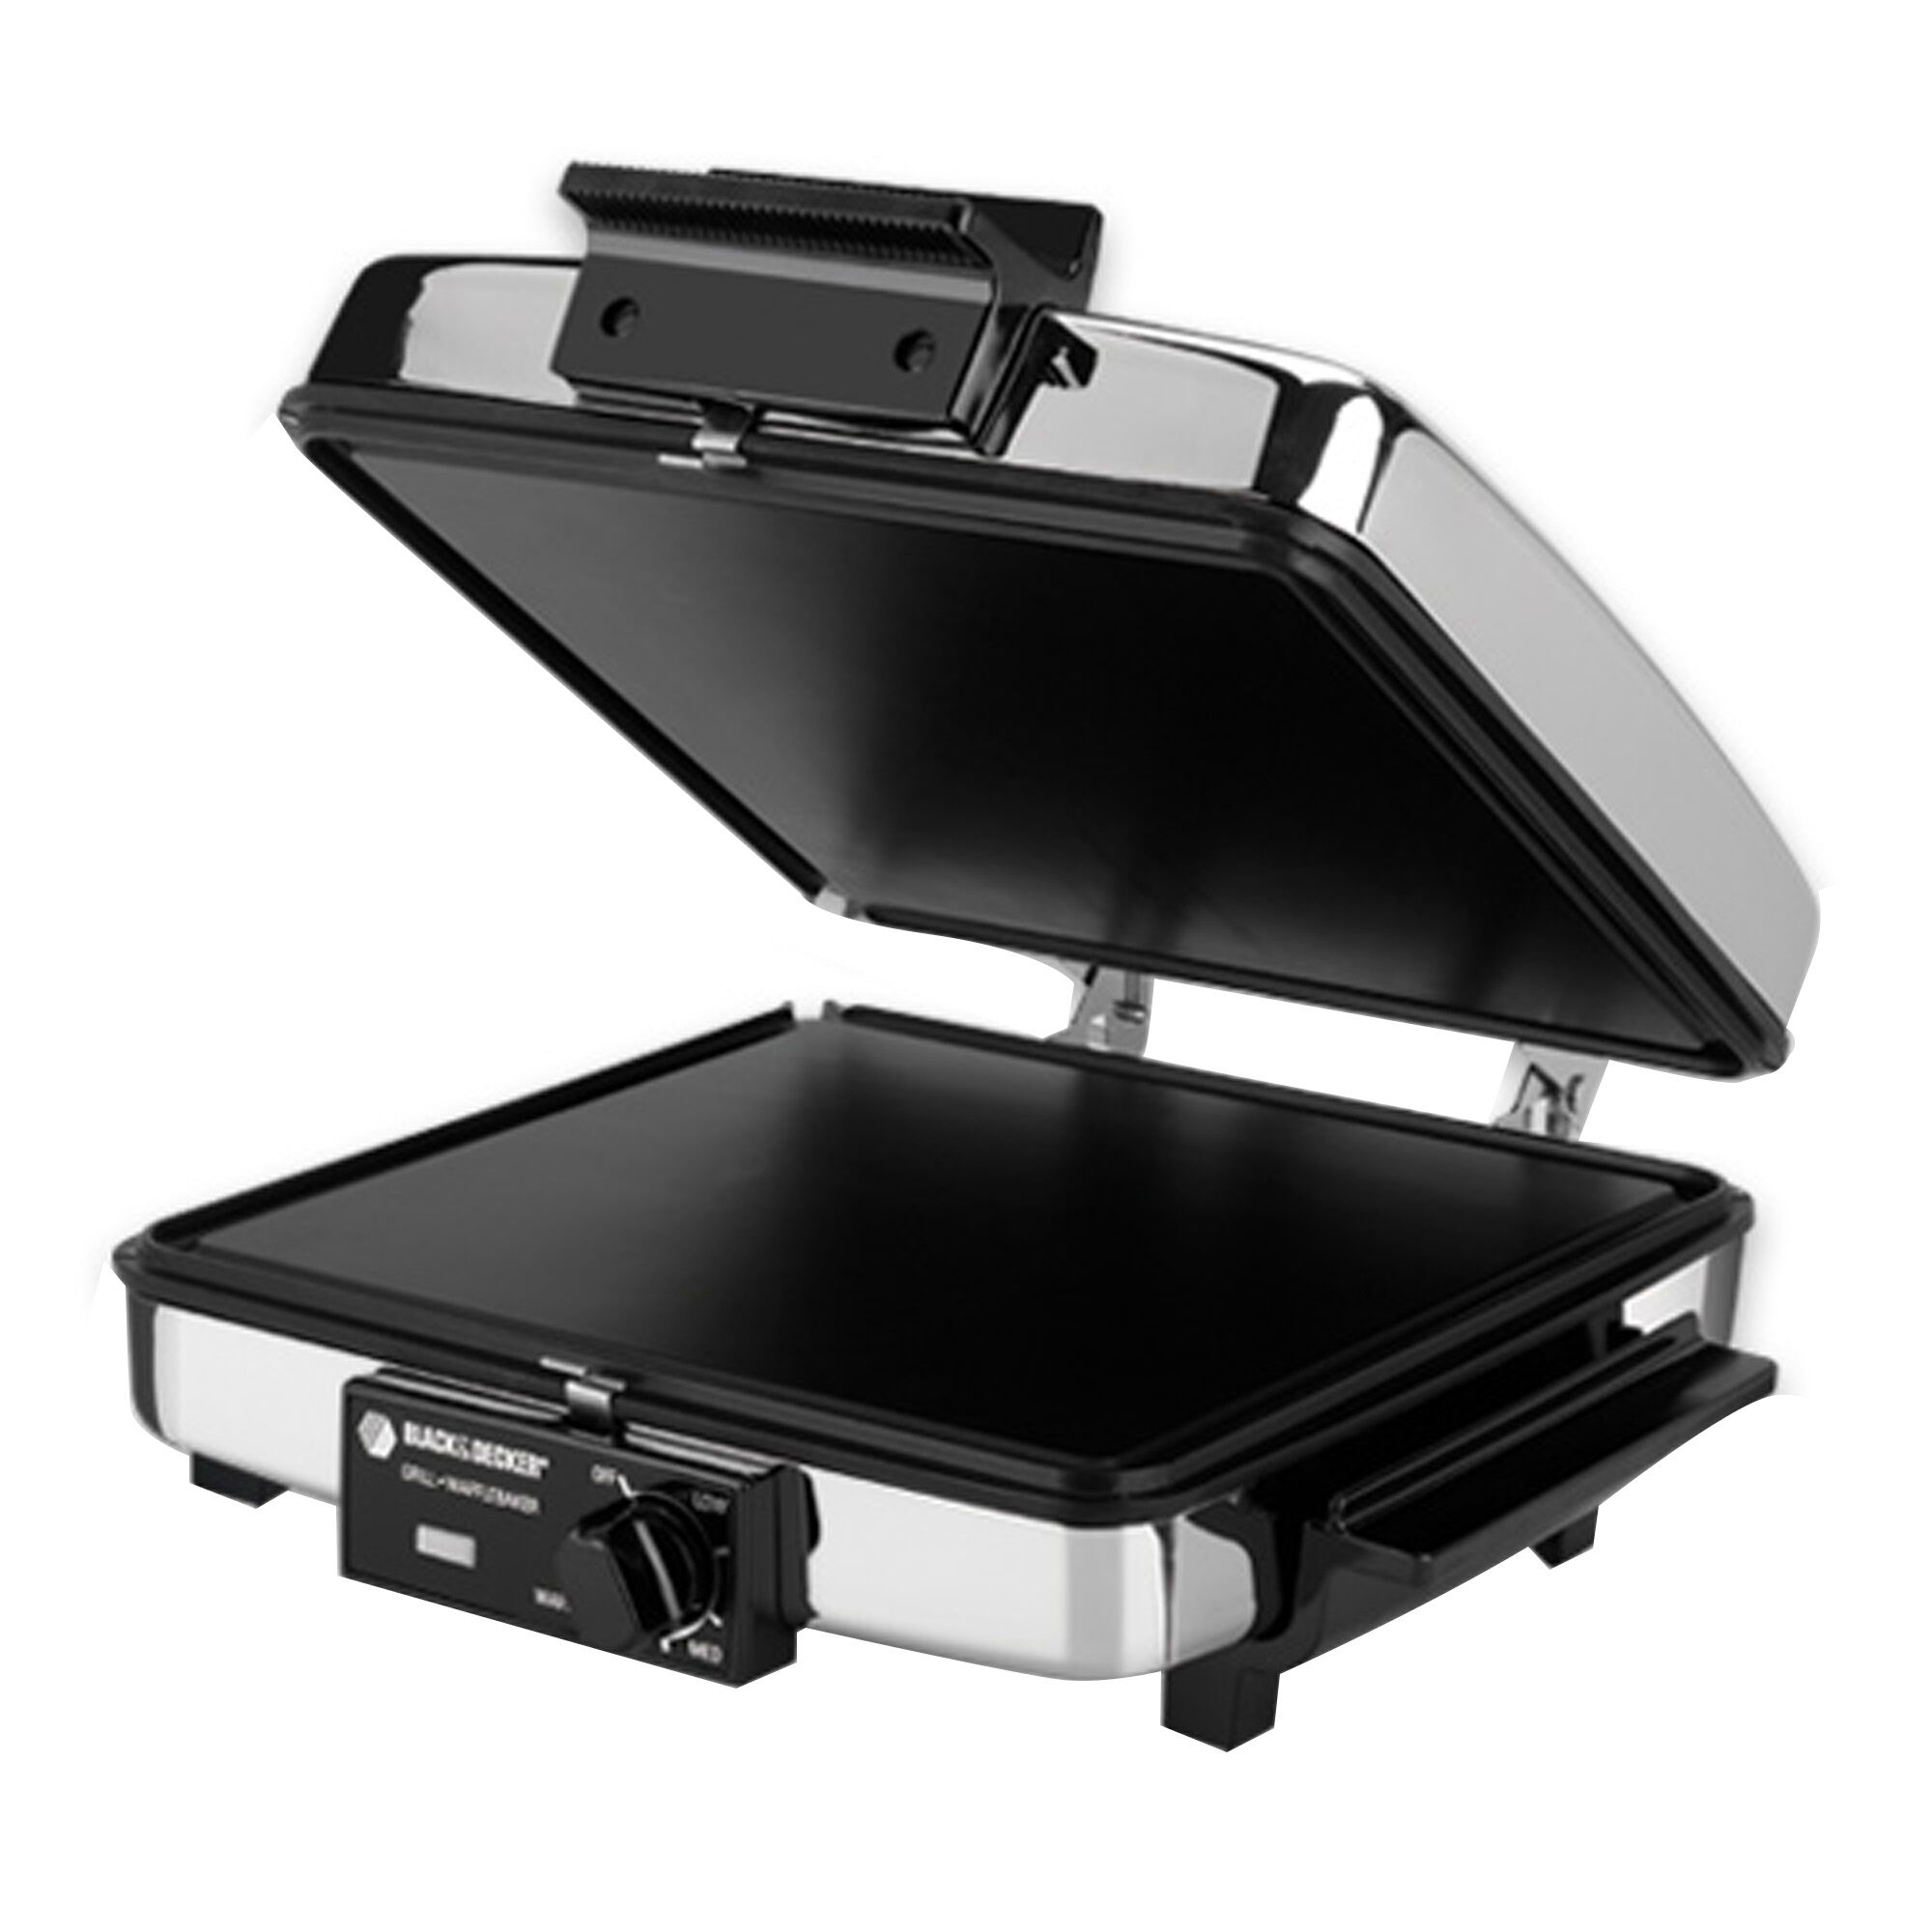 Profile of 3 in 1 grill, griddle, and waffle maker.